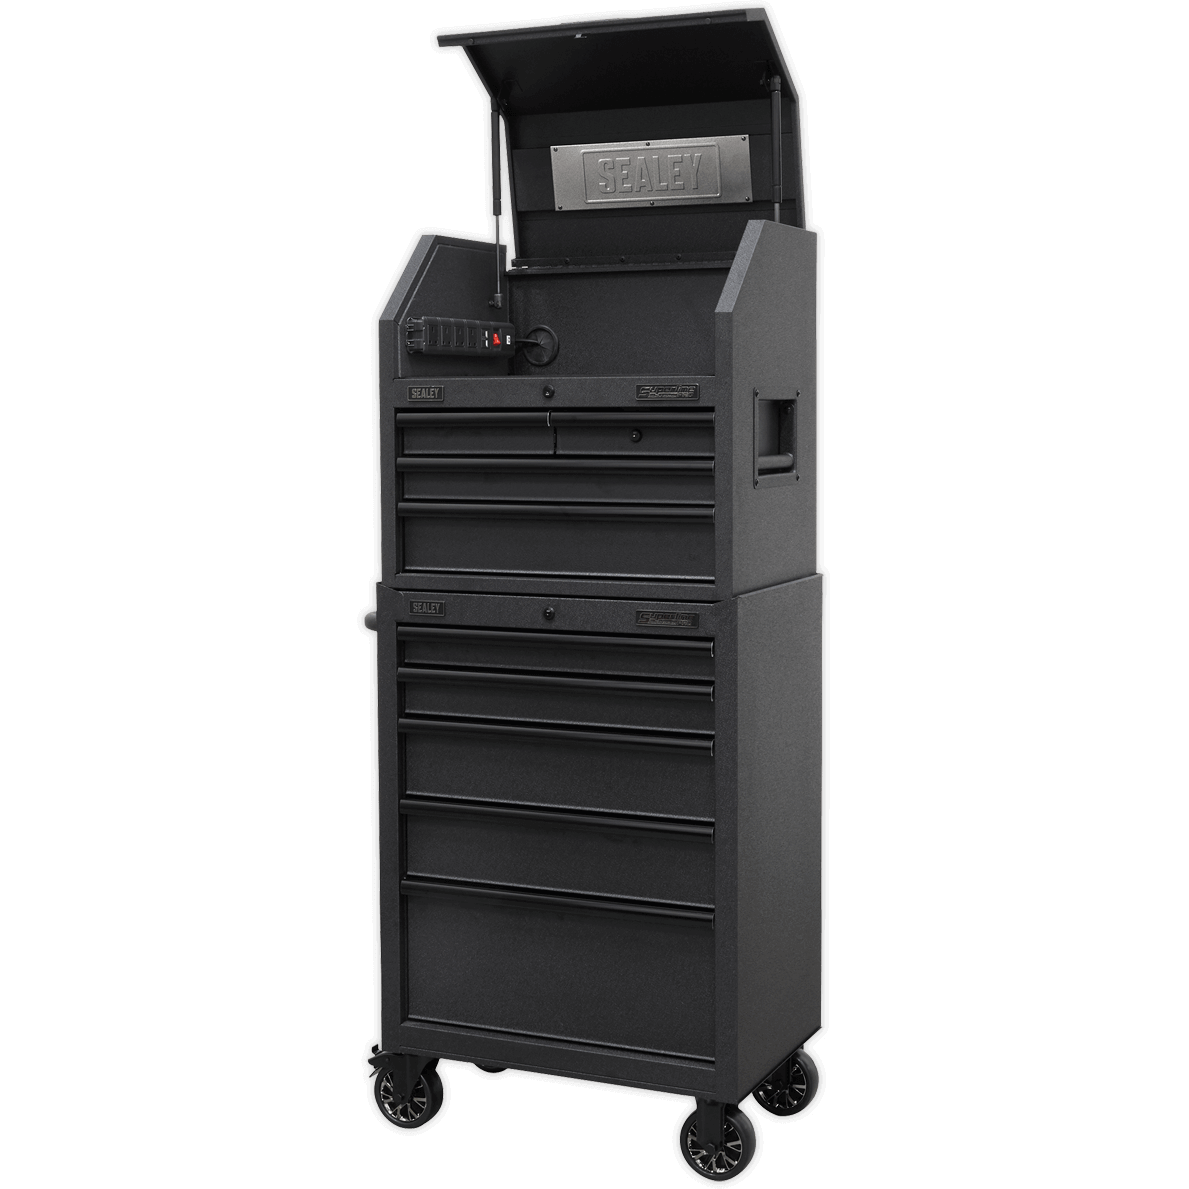 Sealey Superline Black Edition 9 Drawer Roller Cabinet and Tool Chest Black